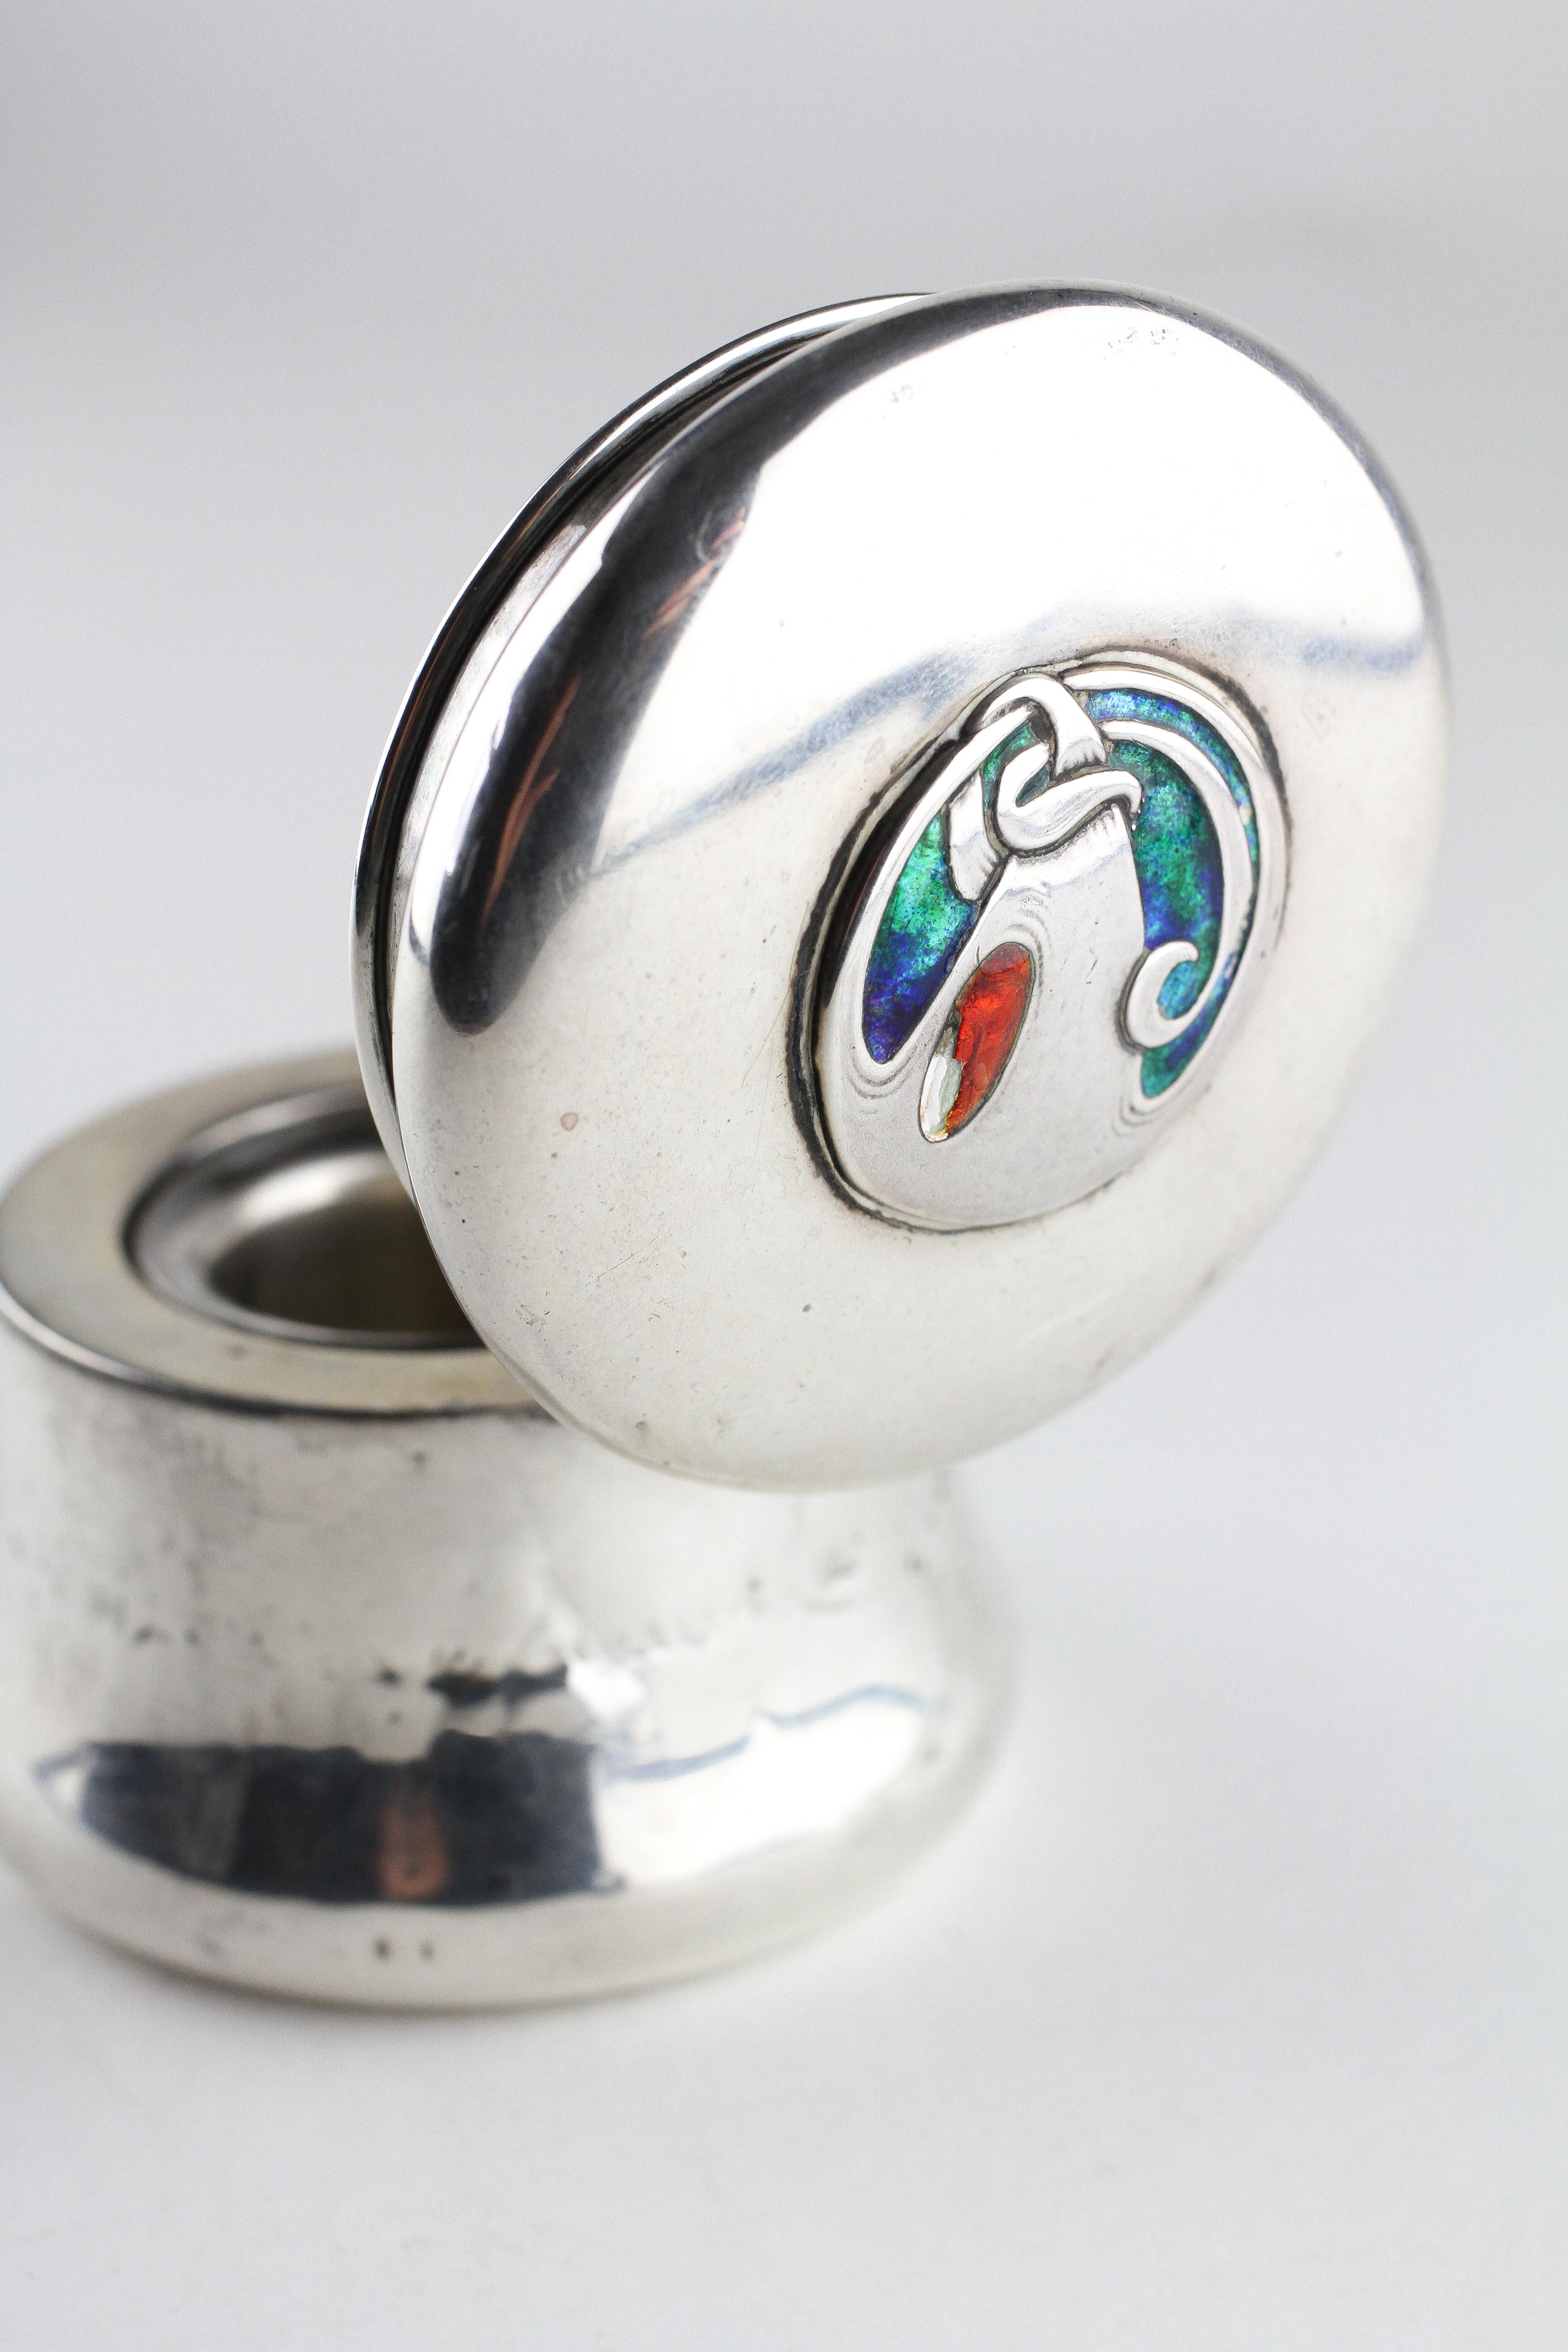 A Liberty & Co silver and enamel "Cymric" inkwell designed by Archibald Knox, - Image 2 of 4